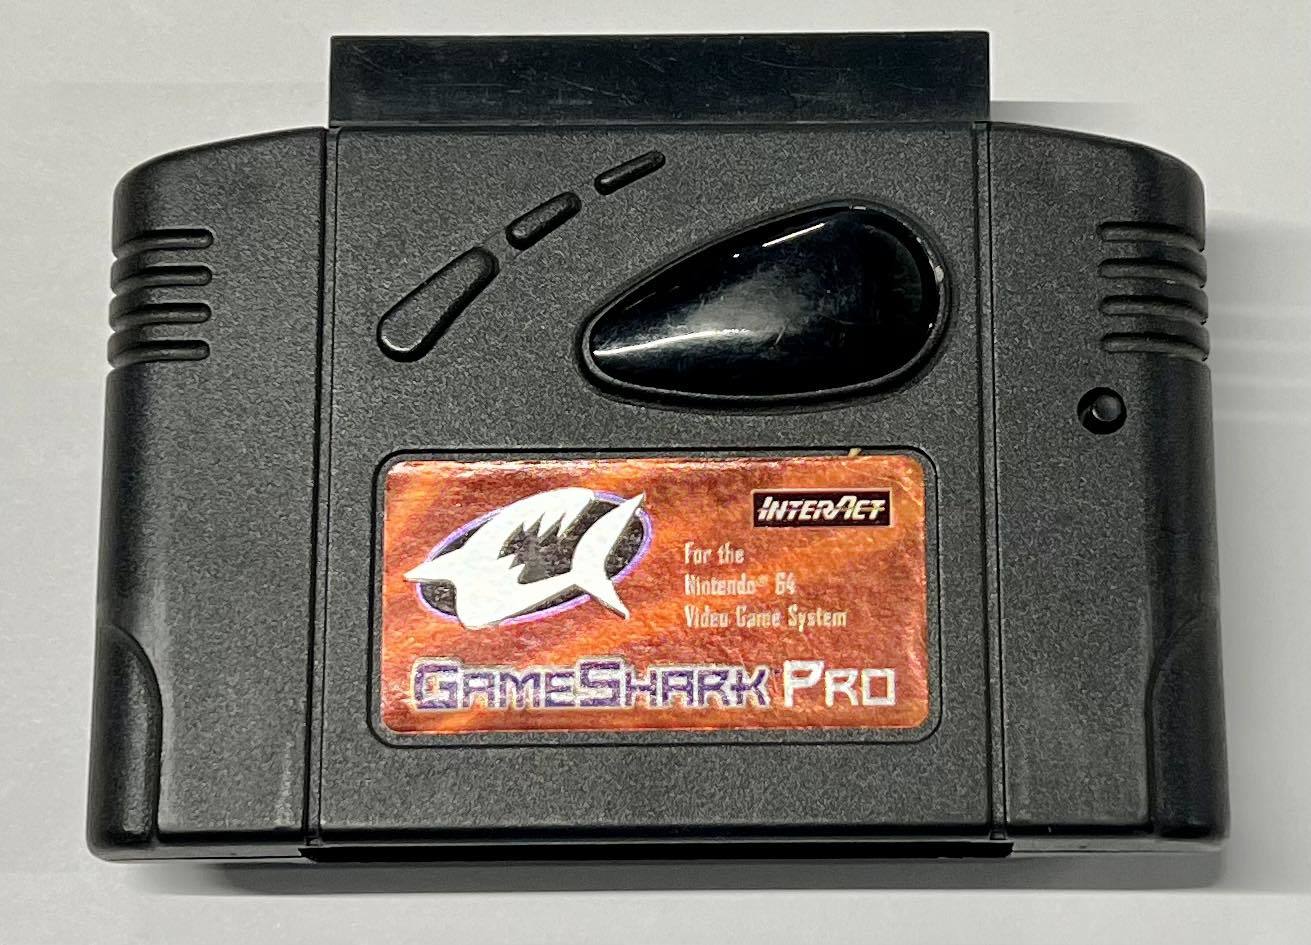 InterAct GameShark Pro V3.3 Version 3.3 For Nintendo 64 N64 w/ Manuals UNTESTED